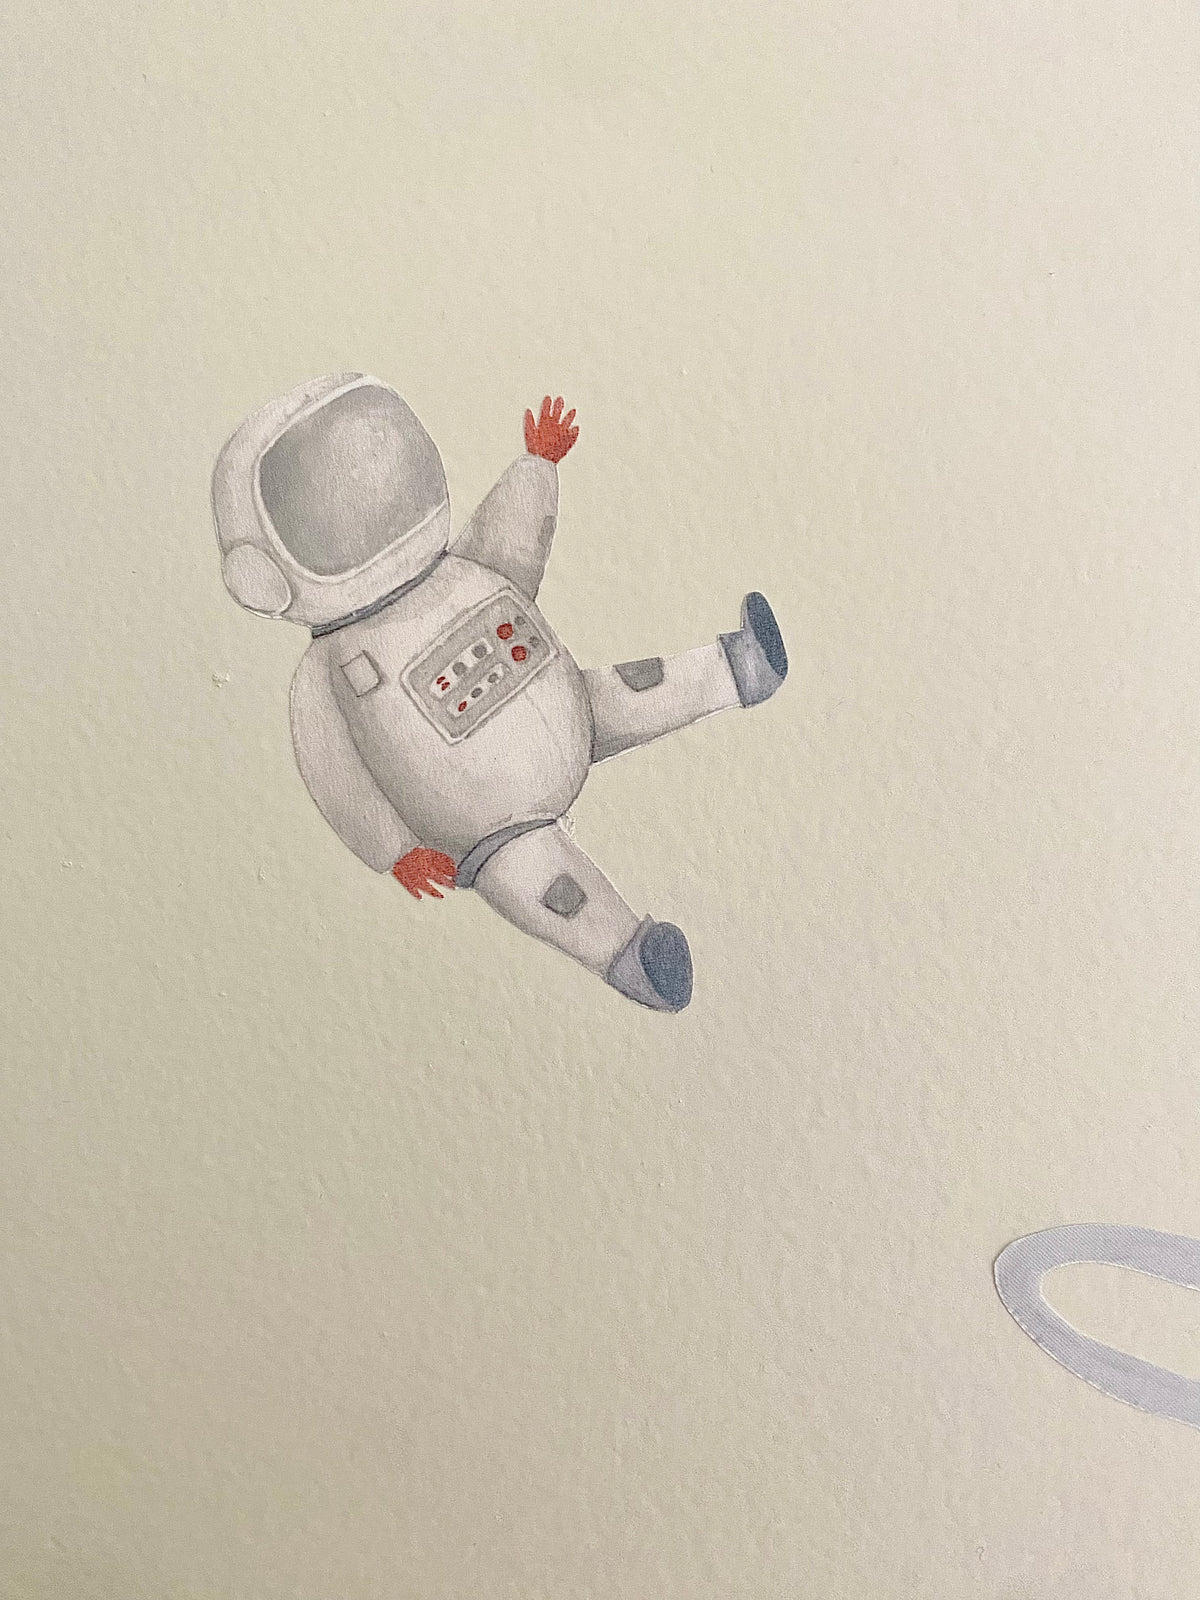 Solar System Wall Stickers For Your Little Astronaut - lovefrankieart